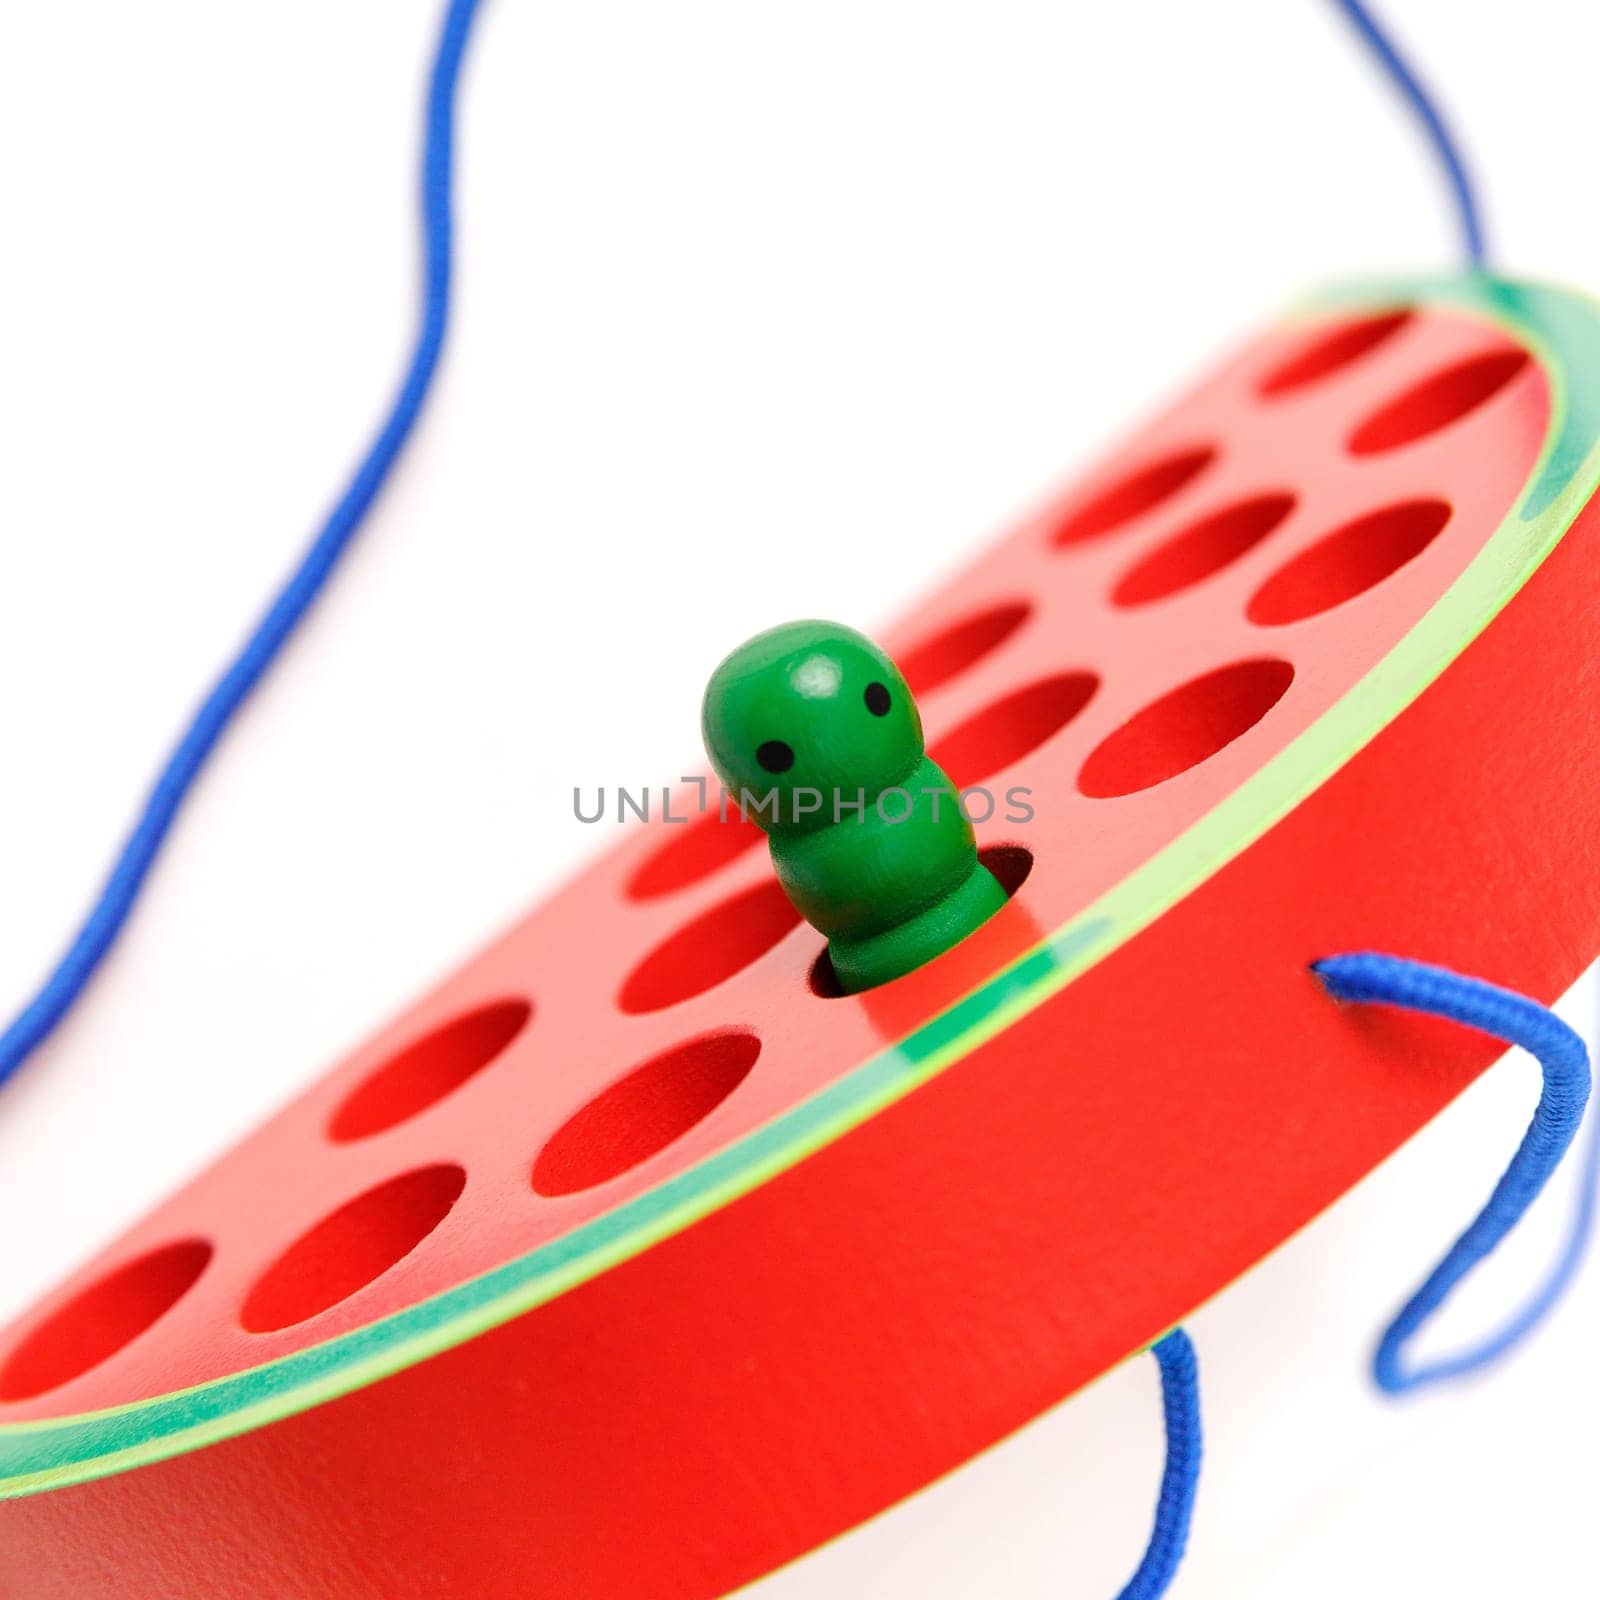 Kid's wooden toy in the shape of a watermelon with a funny worm on a rope, toy for developing fine hand motor skills by Rom4ek